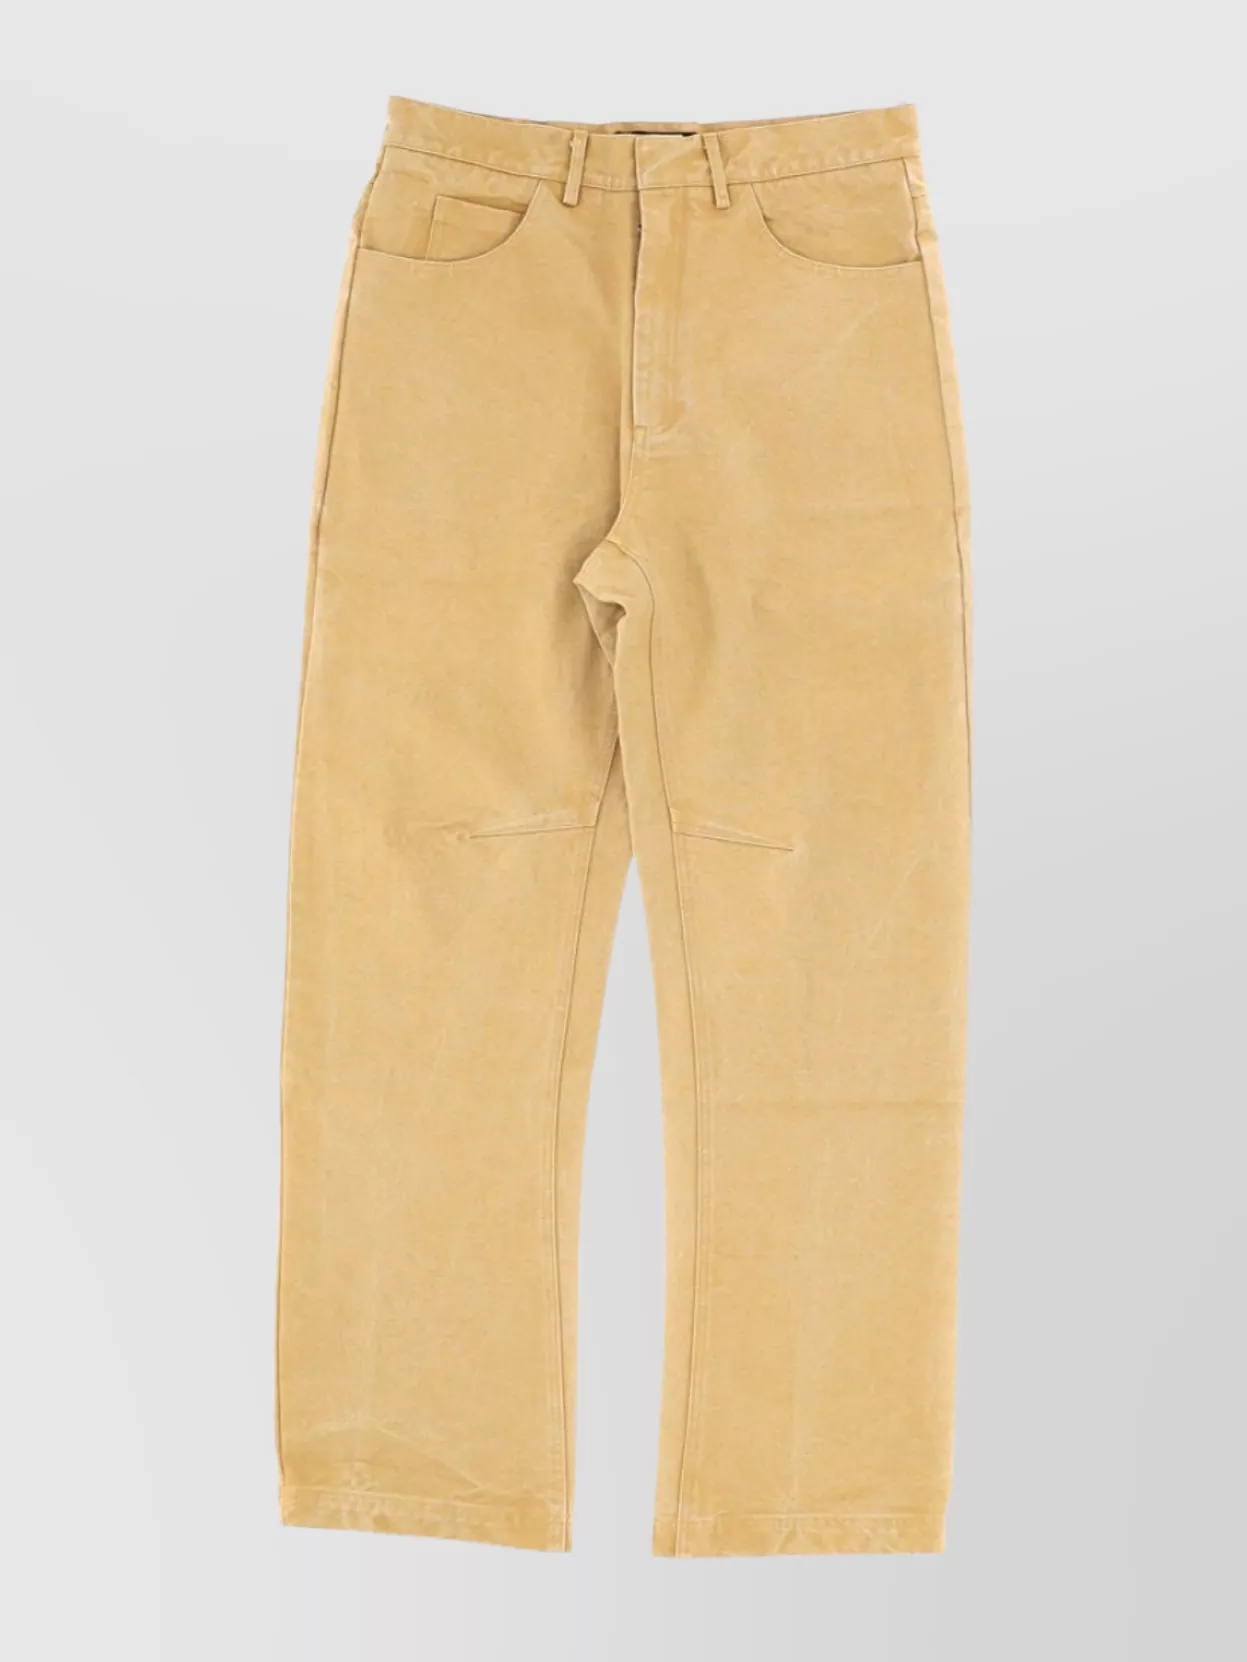 Entire Studios Utility Work Pant Pockets In Gold